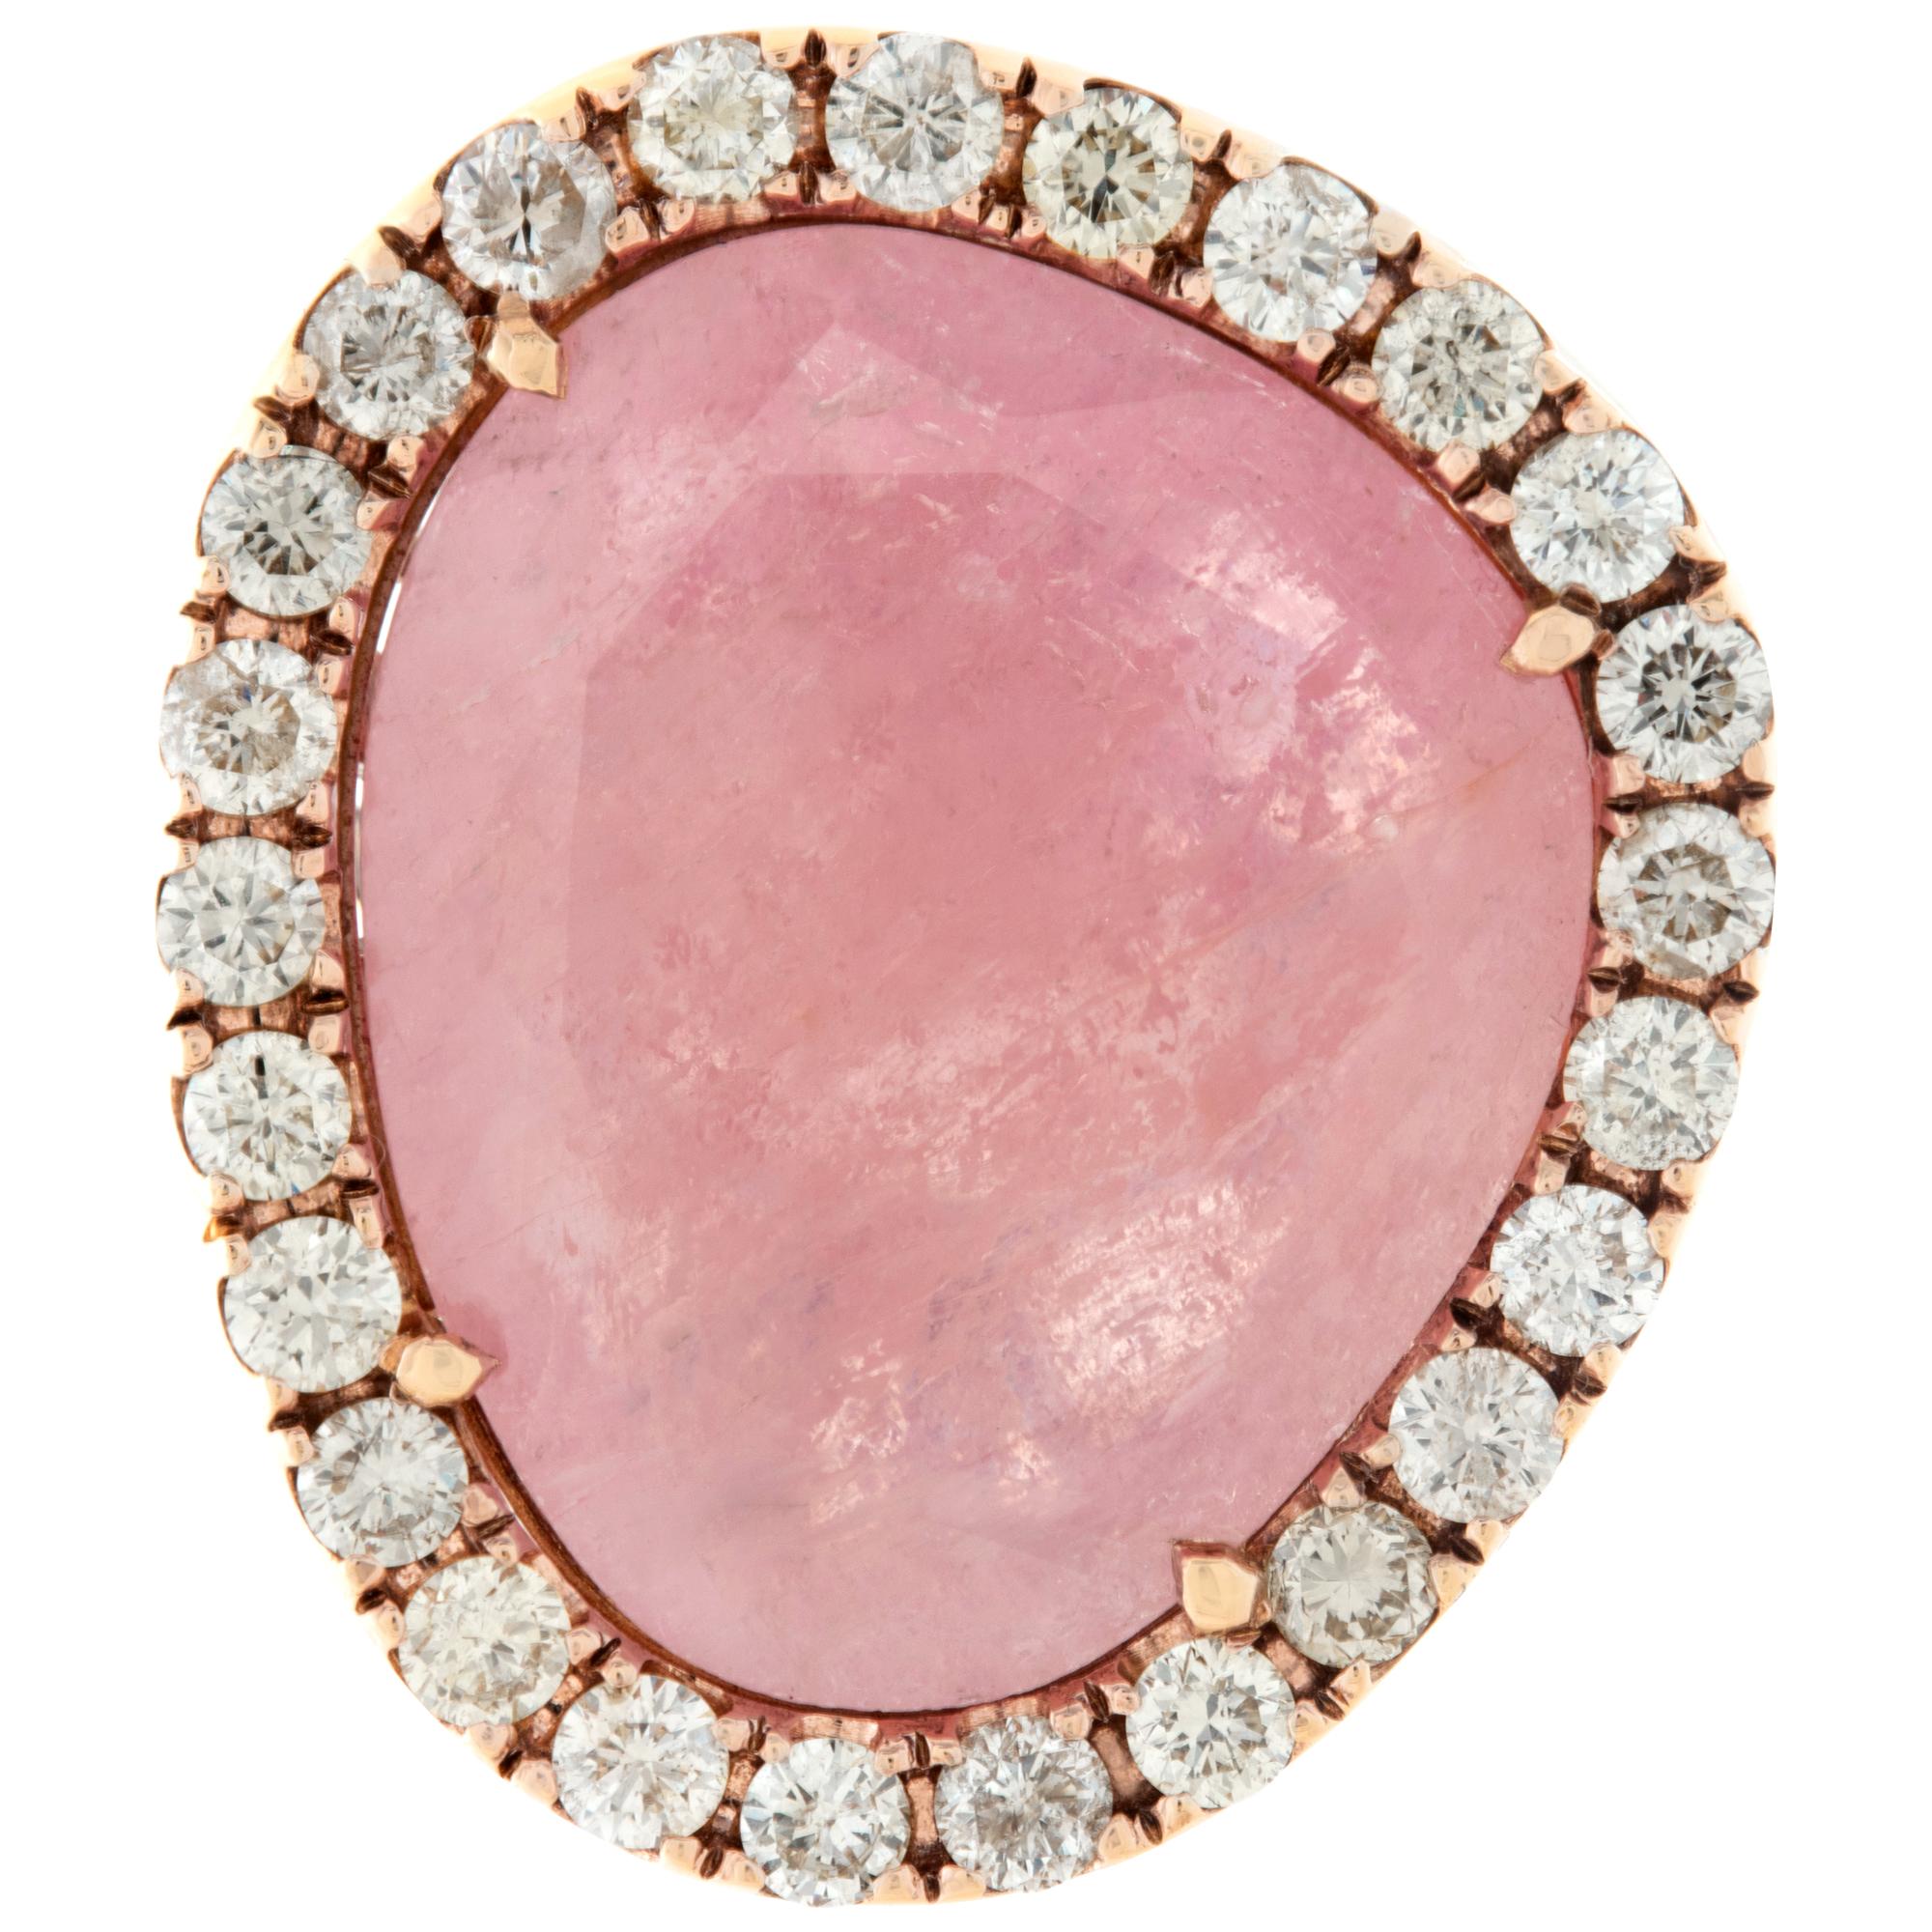 Assymetric contemporary faceted rose quartz ring surrounded with over 1 carat round brilliant cut diamonds set in 18K rose and white gold shank. Size 5.25. Width at head: 25mm, width at shank: 2.2mm.This Diamond ring is currently size 5.25 and some